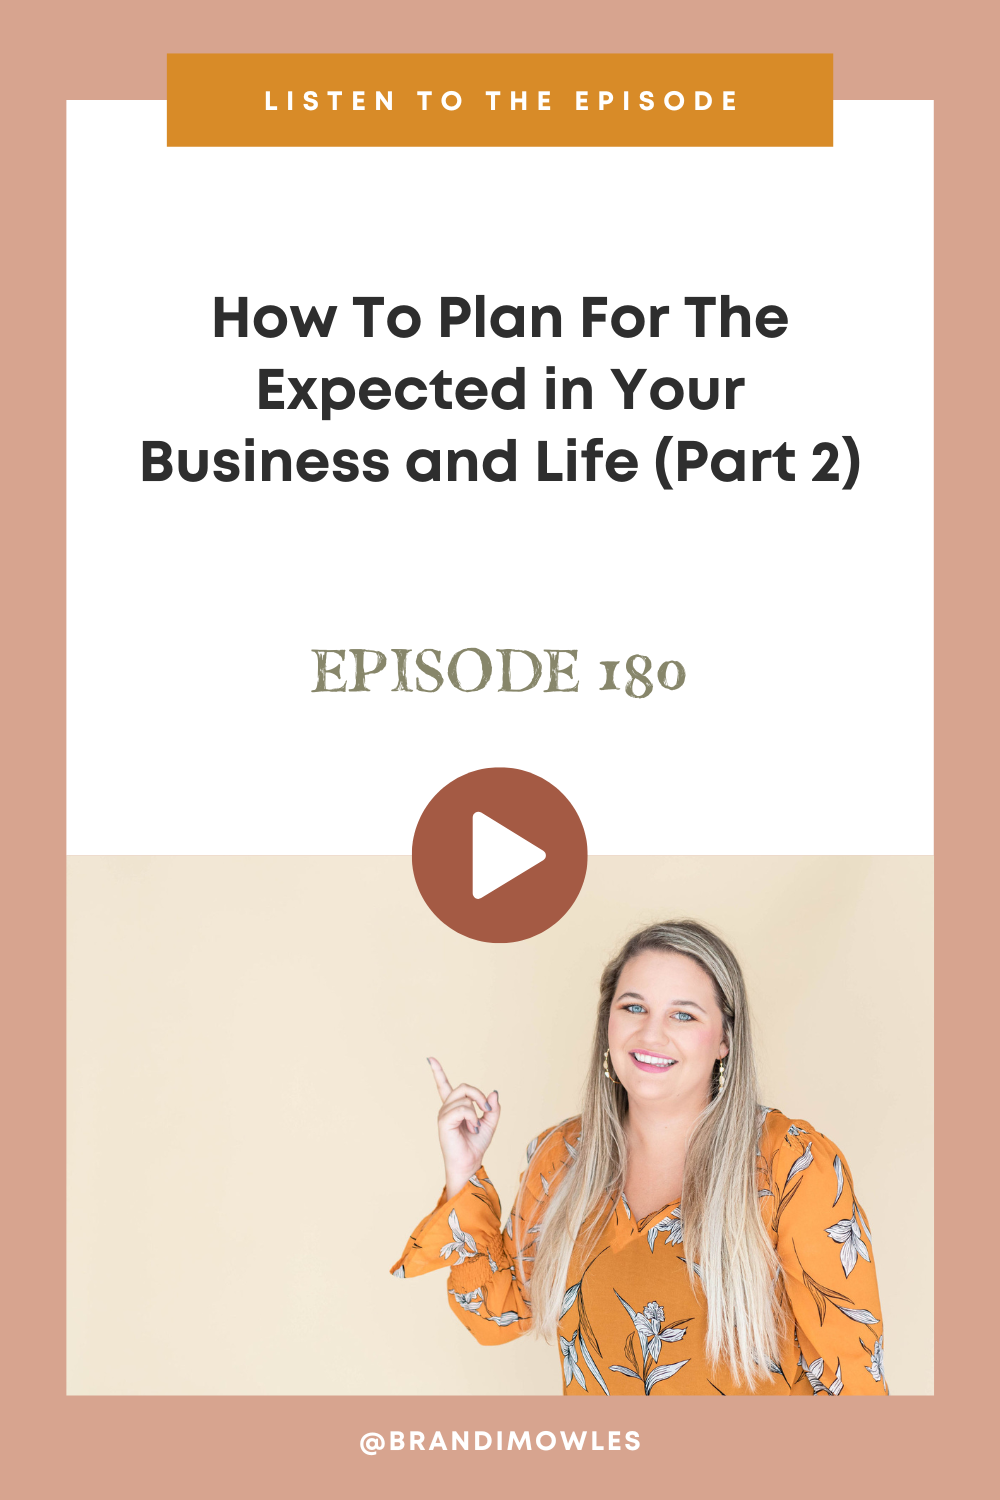 Brandi Mowles podcast episode feature about business planning